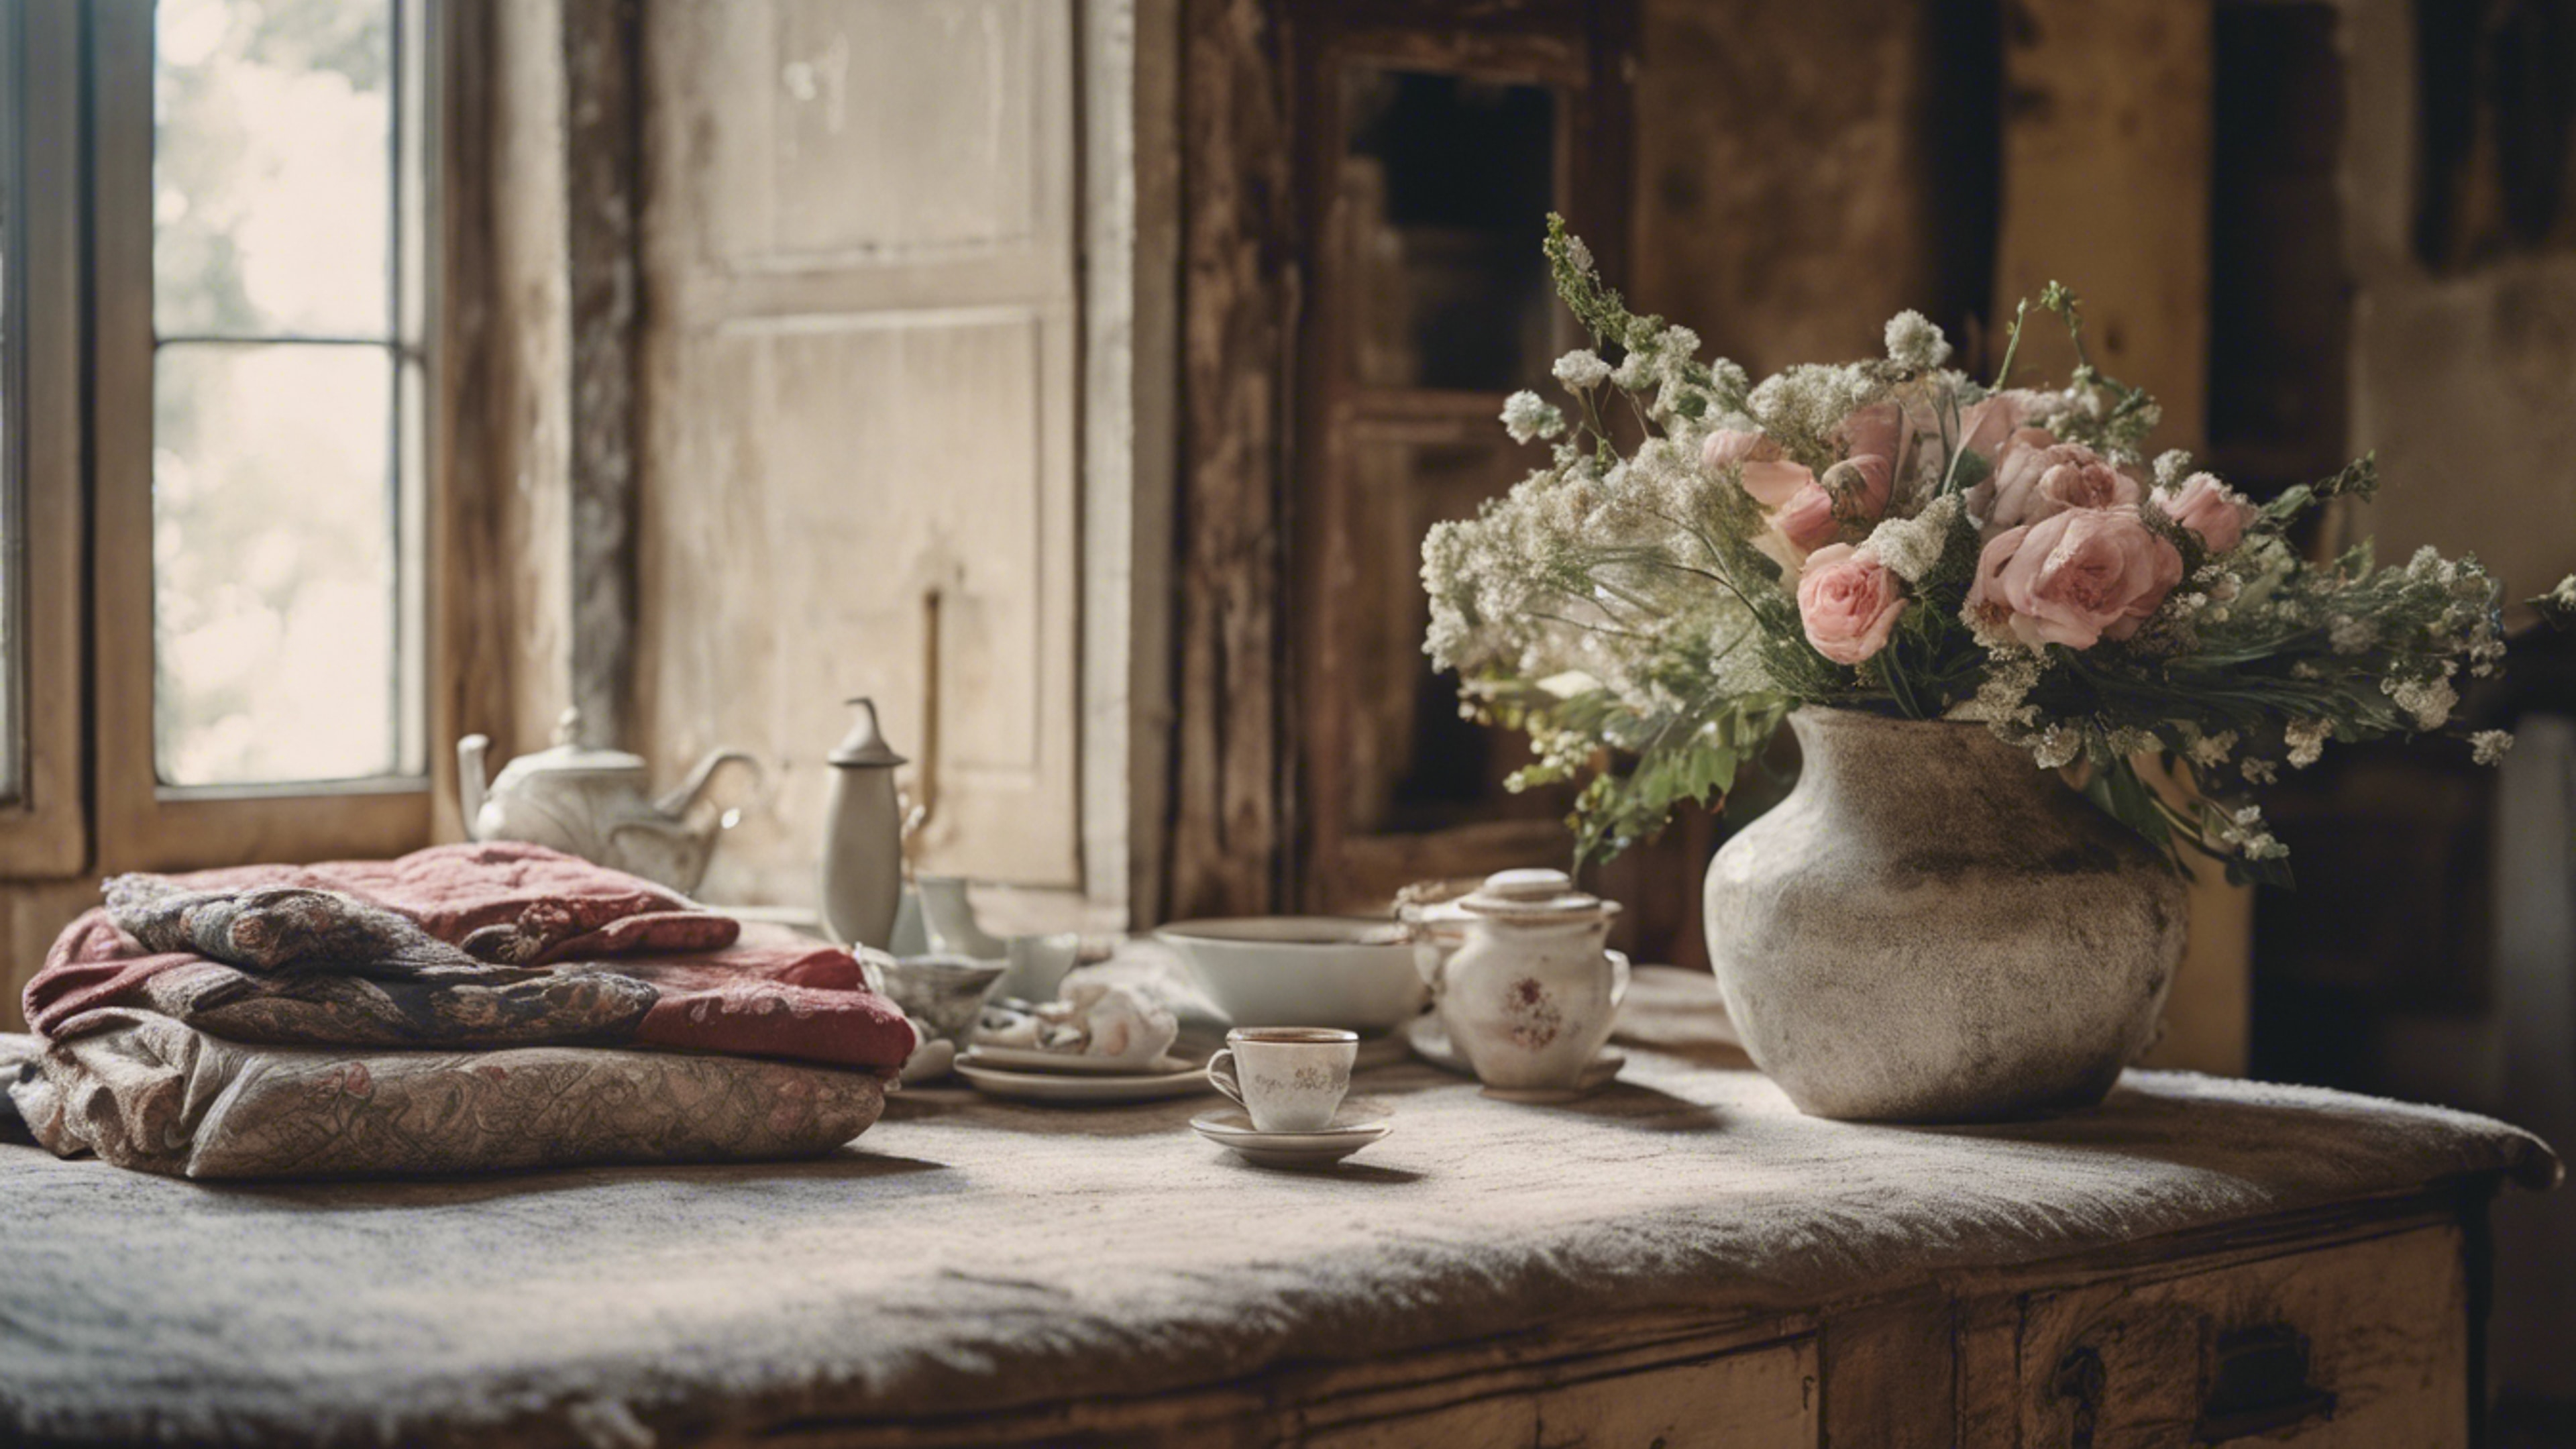 Vintage French country home interiors, full of hand-stitched textiles, distressed furniture, and fresh flowers. Tapetai[3ce768b1b5e34f149bef]